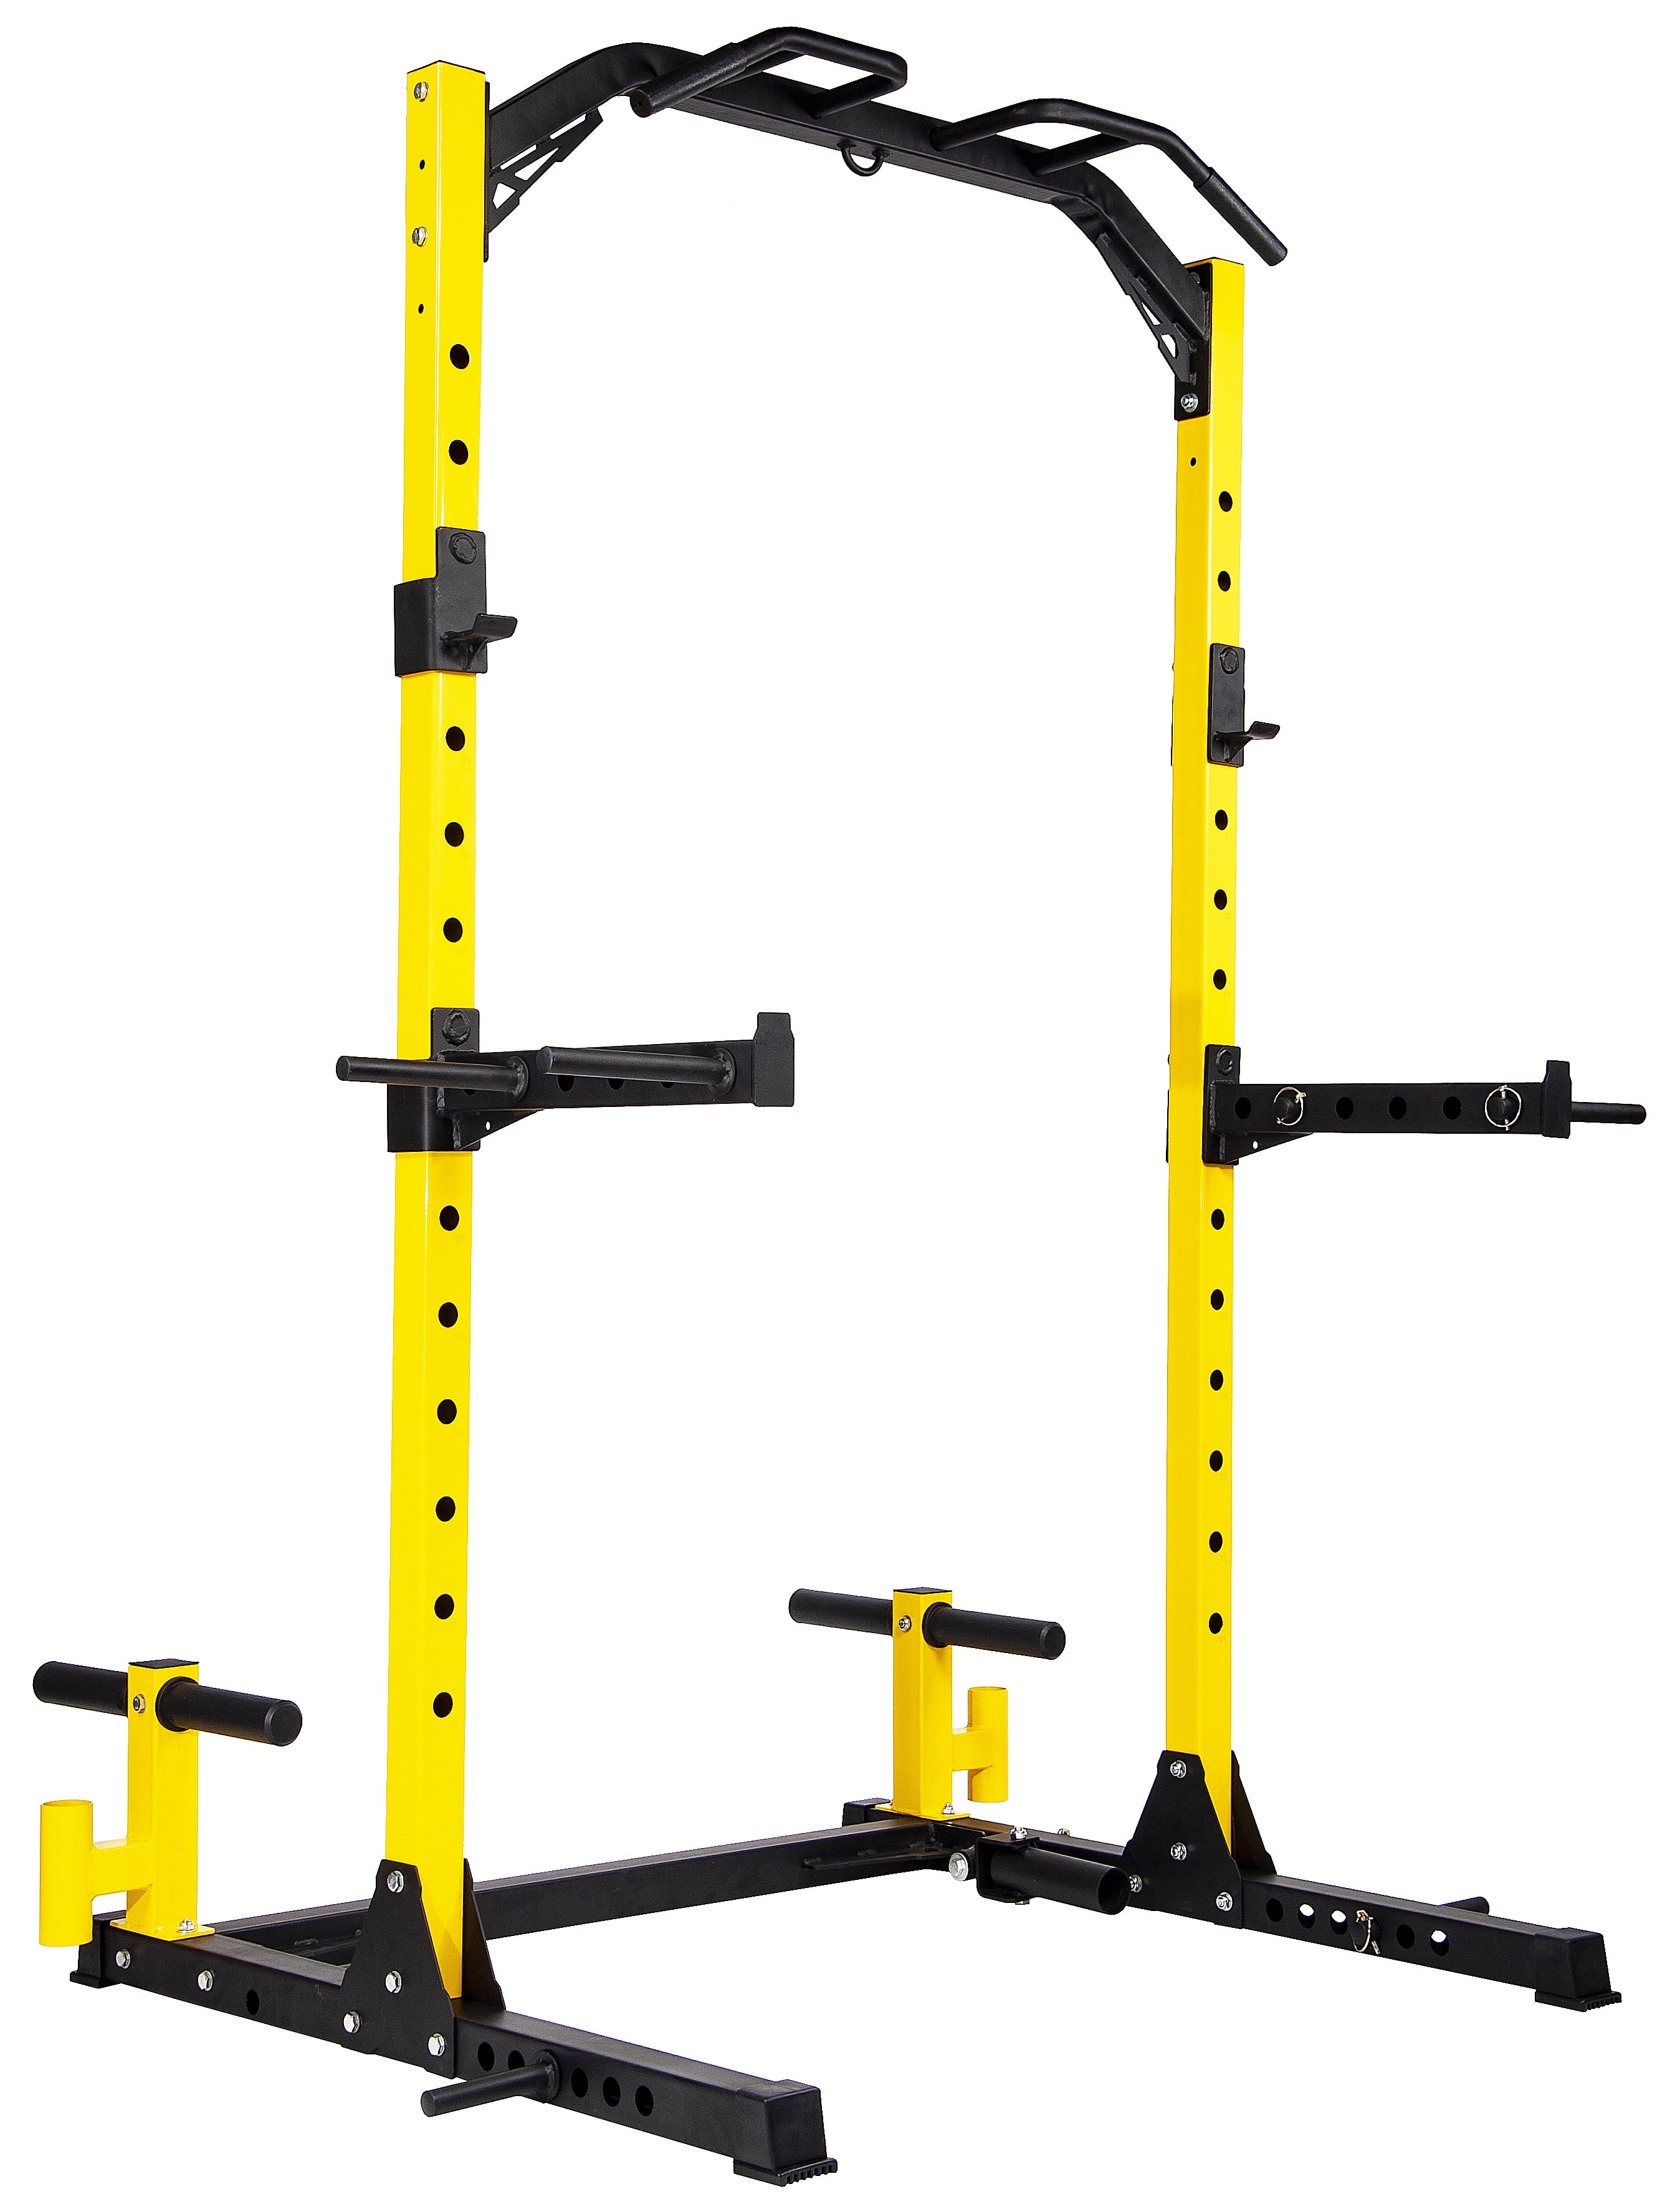 D Details about   Hulkfit 1000-Pound Capacity Multi-Function Adjustable Power Cage With J-Hooks 